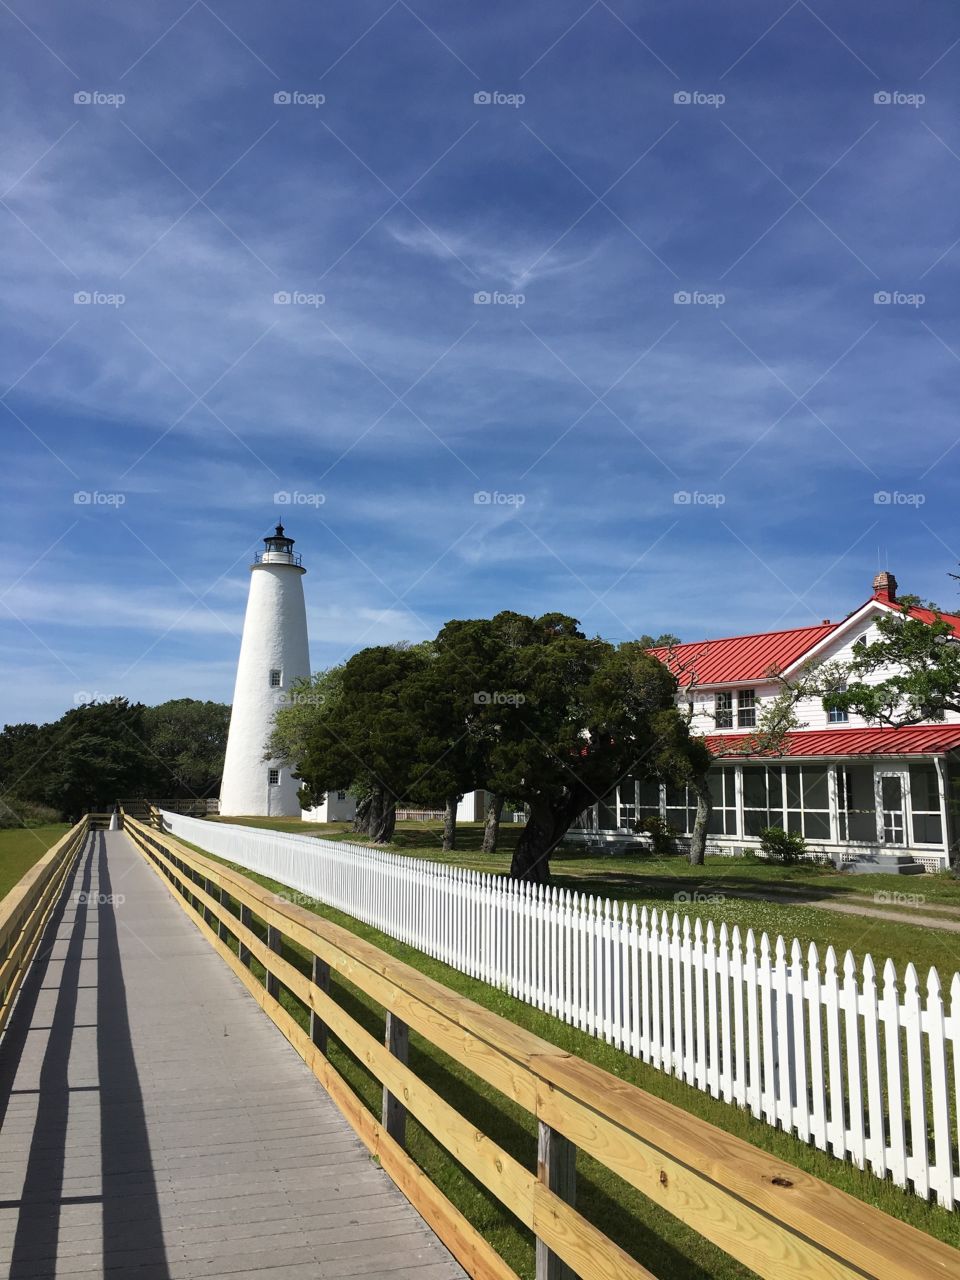 Walkway to the lighthouse at Ocracoke Inlet, NC with the lighthouse keepers residence on the right